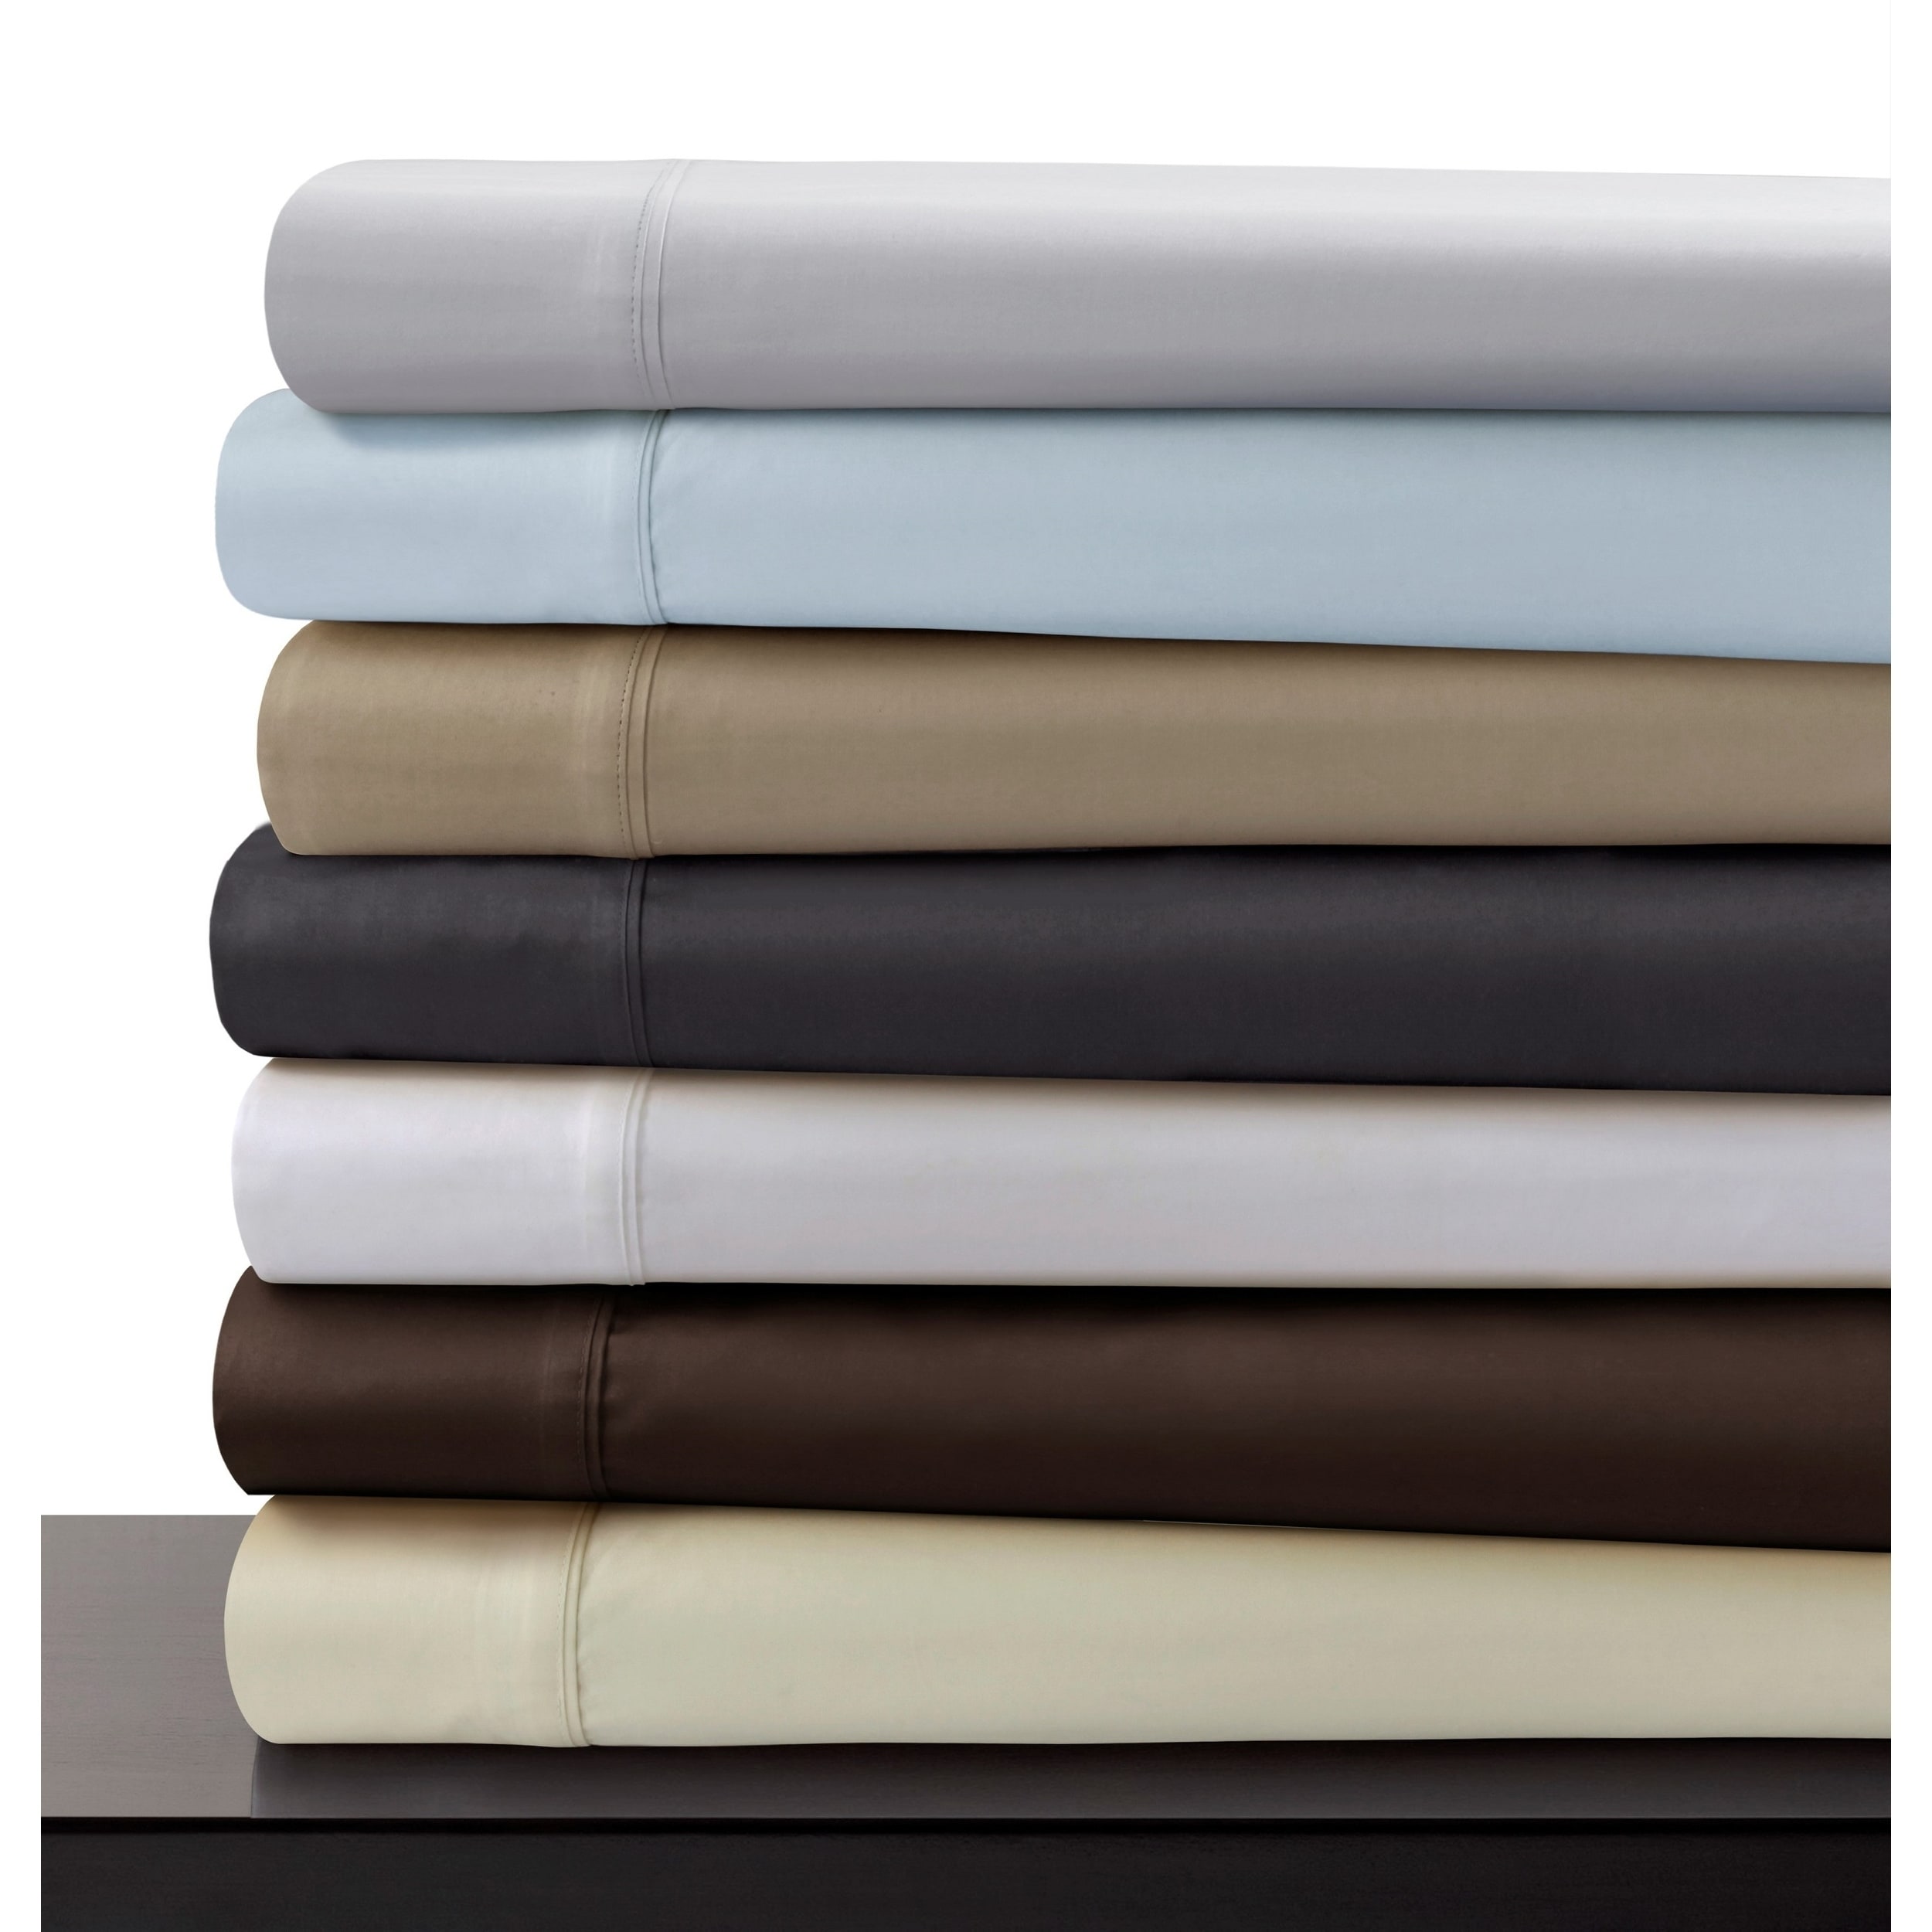 White Kotton Culture 600-Thread Count EGYPTIAN COTTON 3 Piece Fitted Sheet Set Super King Sheet with 48 cm extra deep pocket 100% cotton Bed Soft sheets Two 50 x 90cm Pillowcases 180 x 200cm 